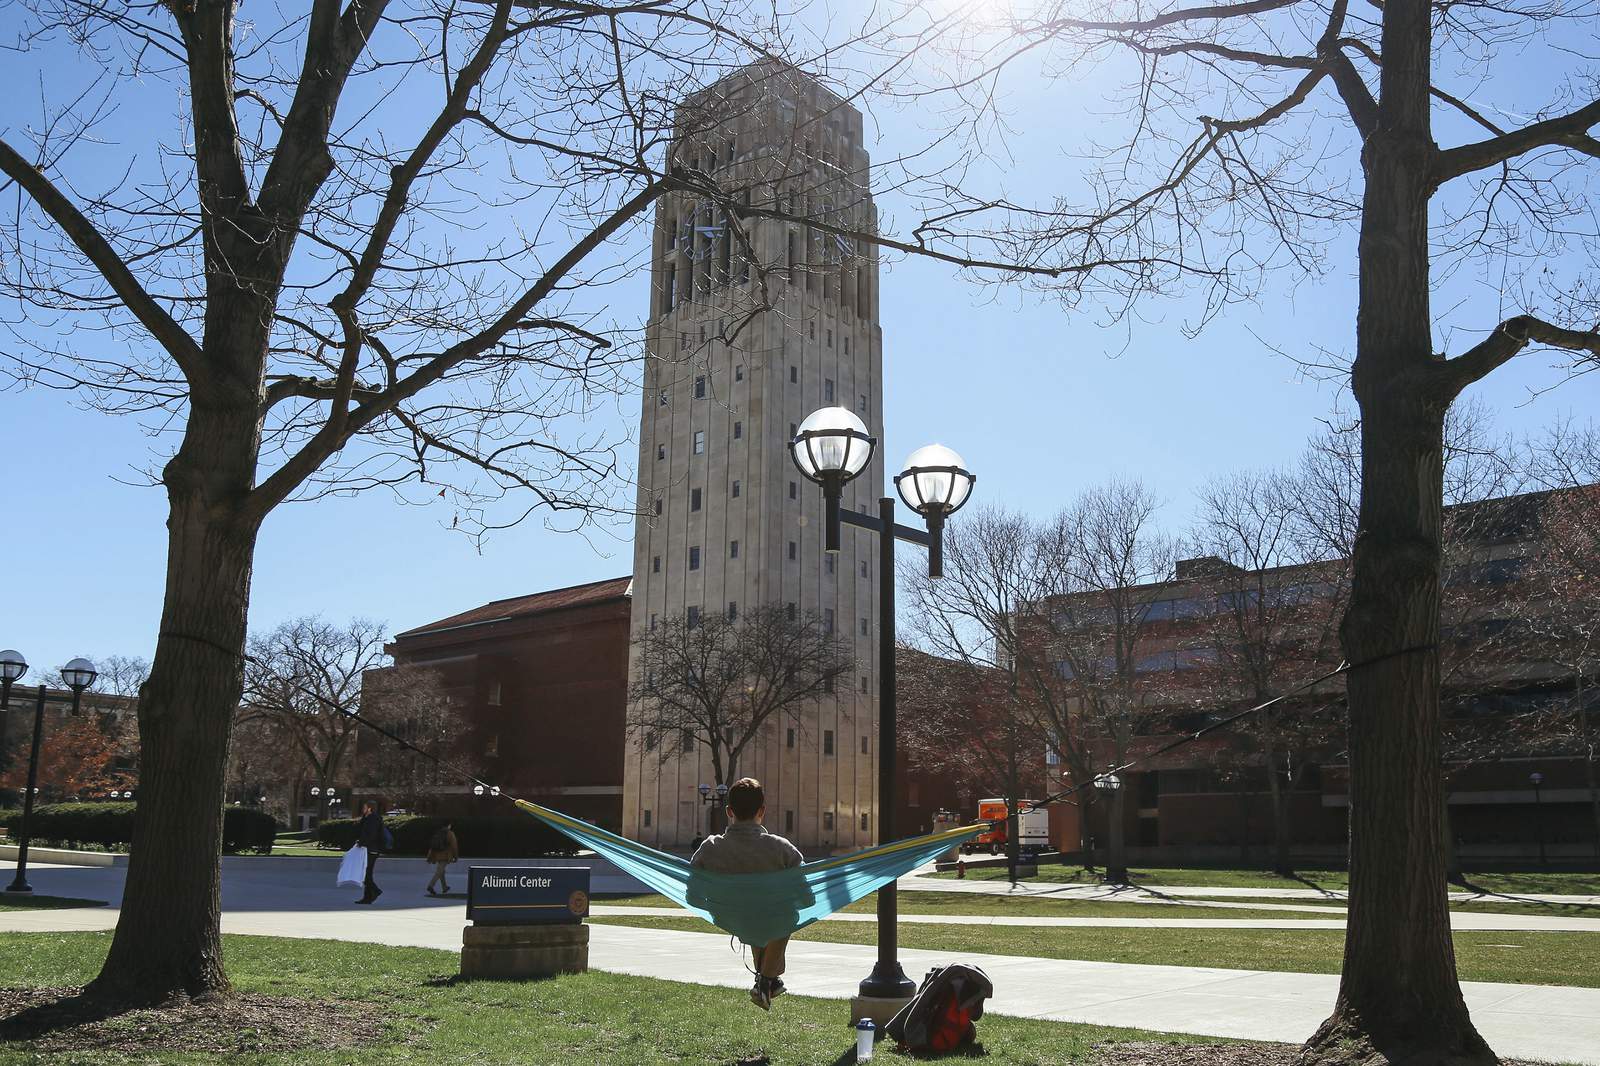 University of Michigan academic calendar: Here are the new dates for fall, winter semesters